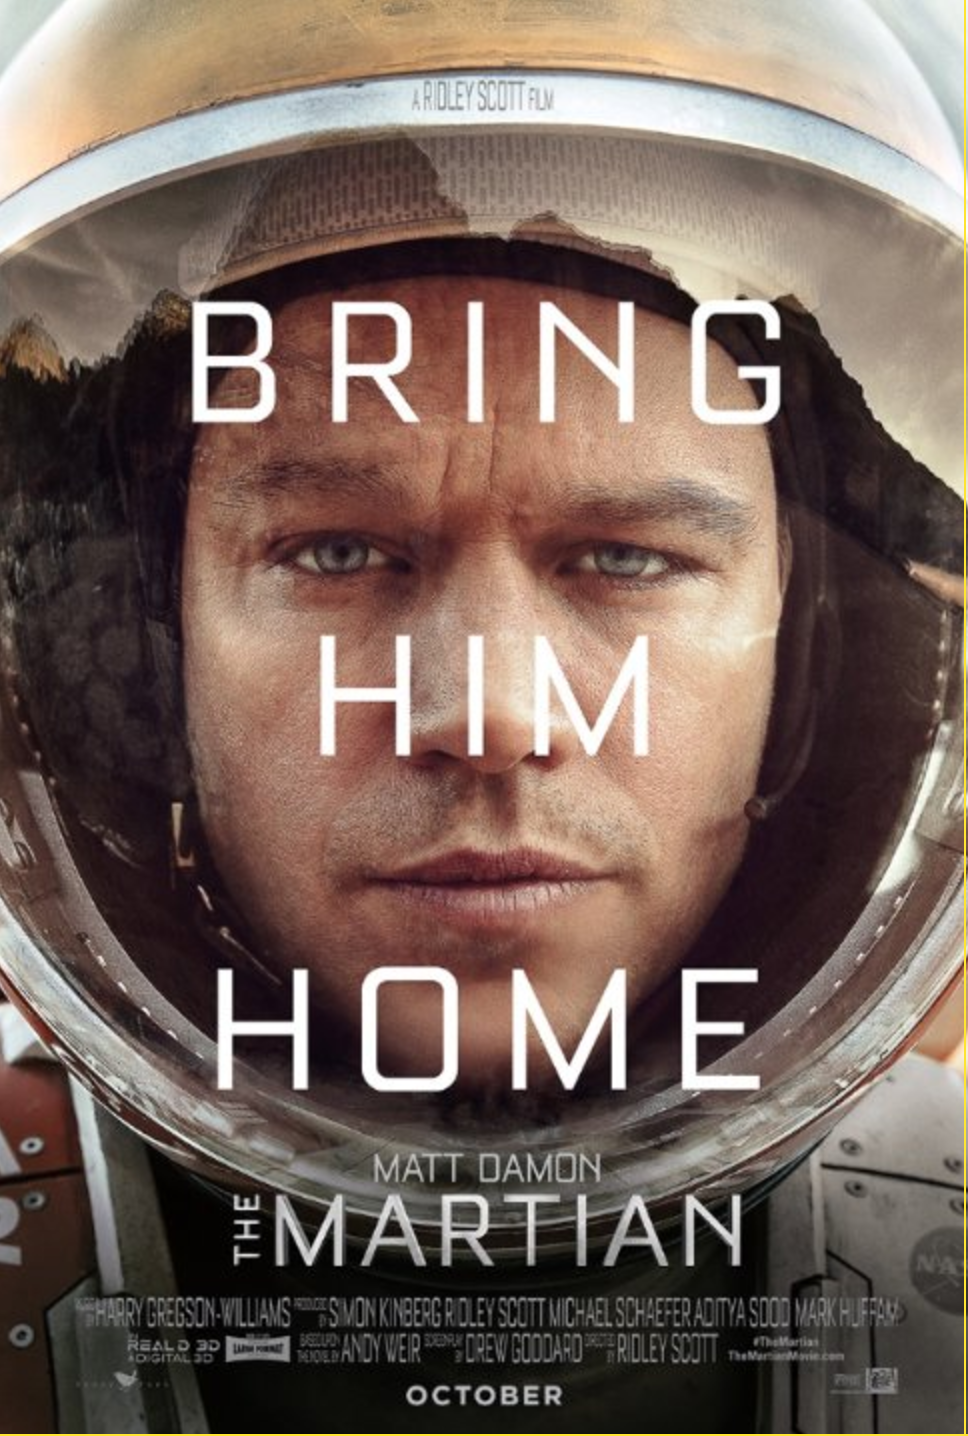 I Saw The Martian – My review